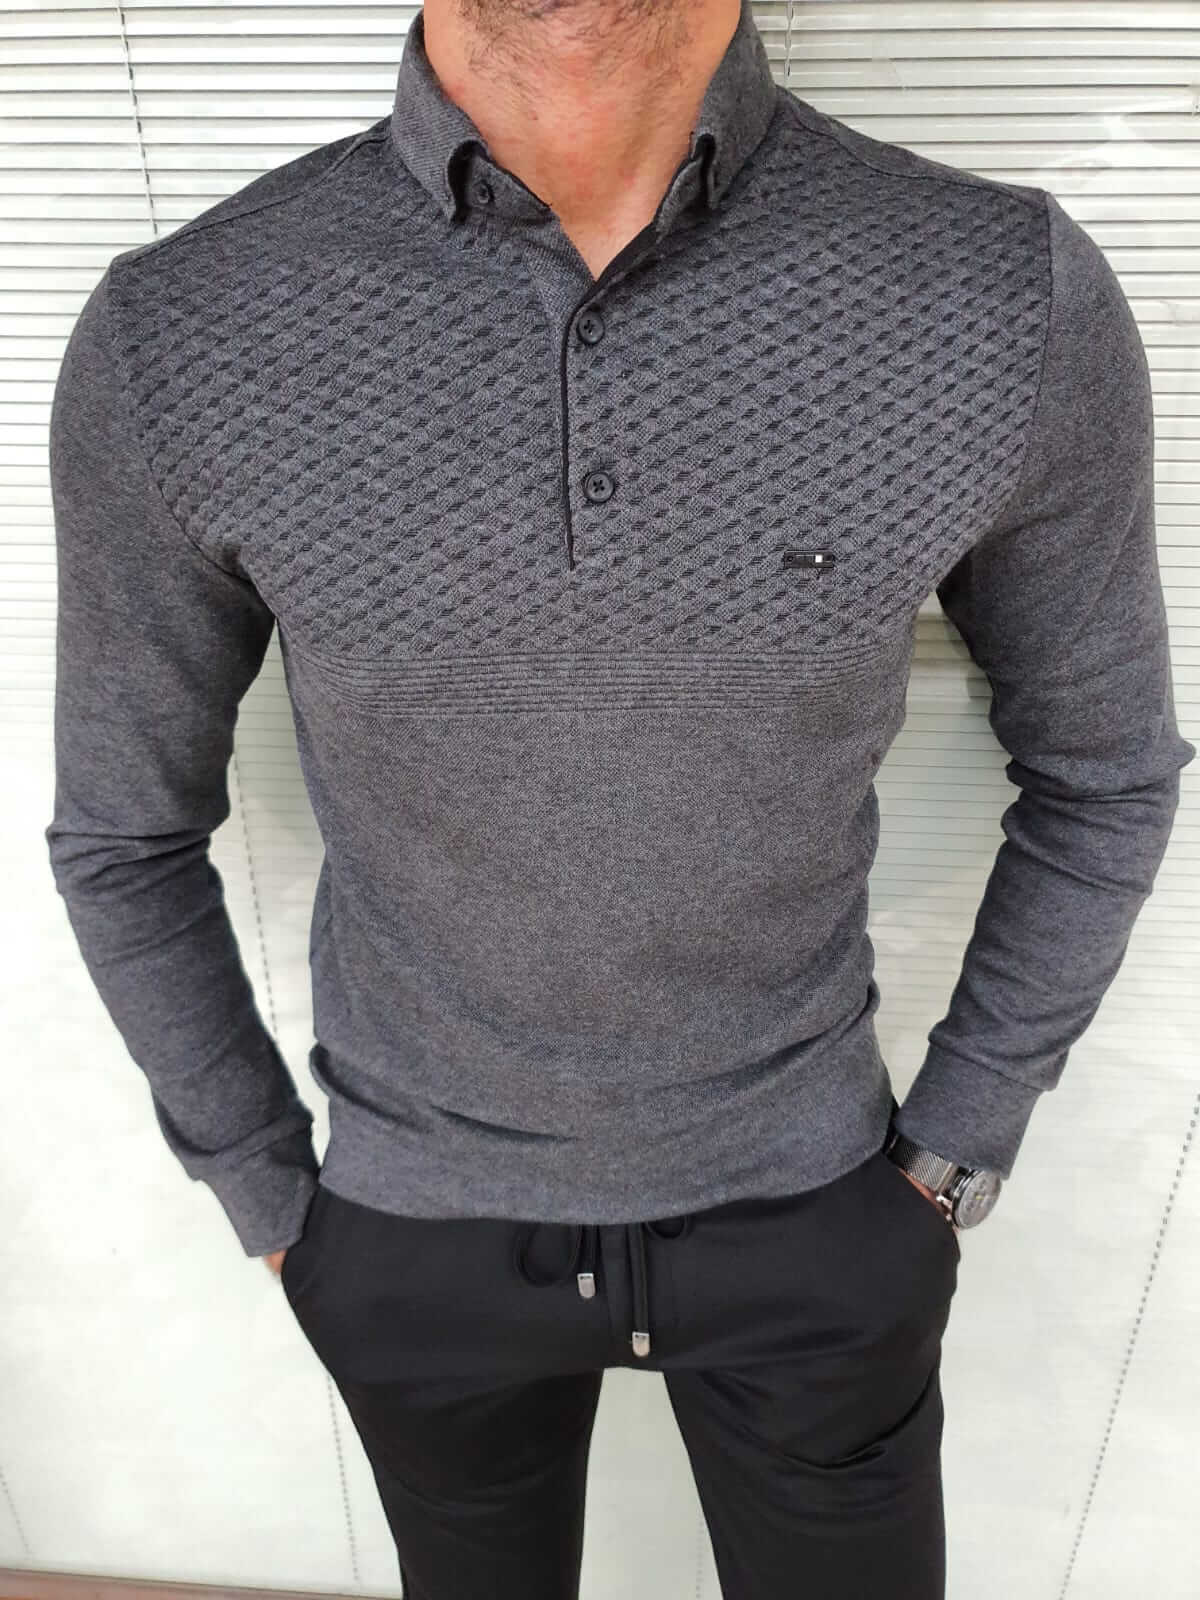 A  long-sleeved gray combed knitwear. The knit fabric has a soft and textured appearance